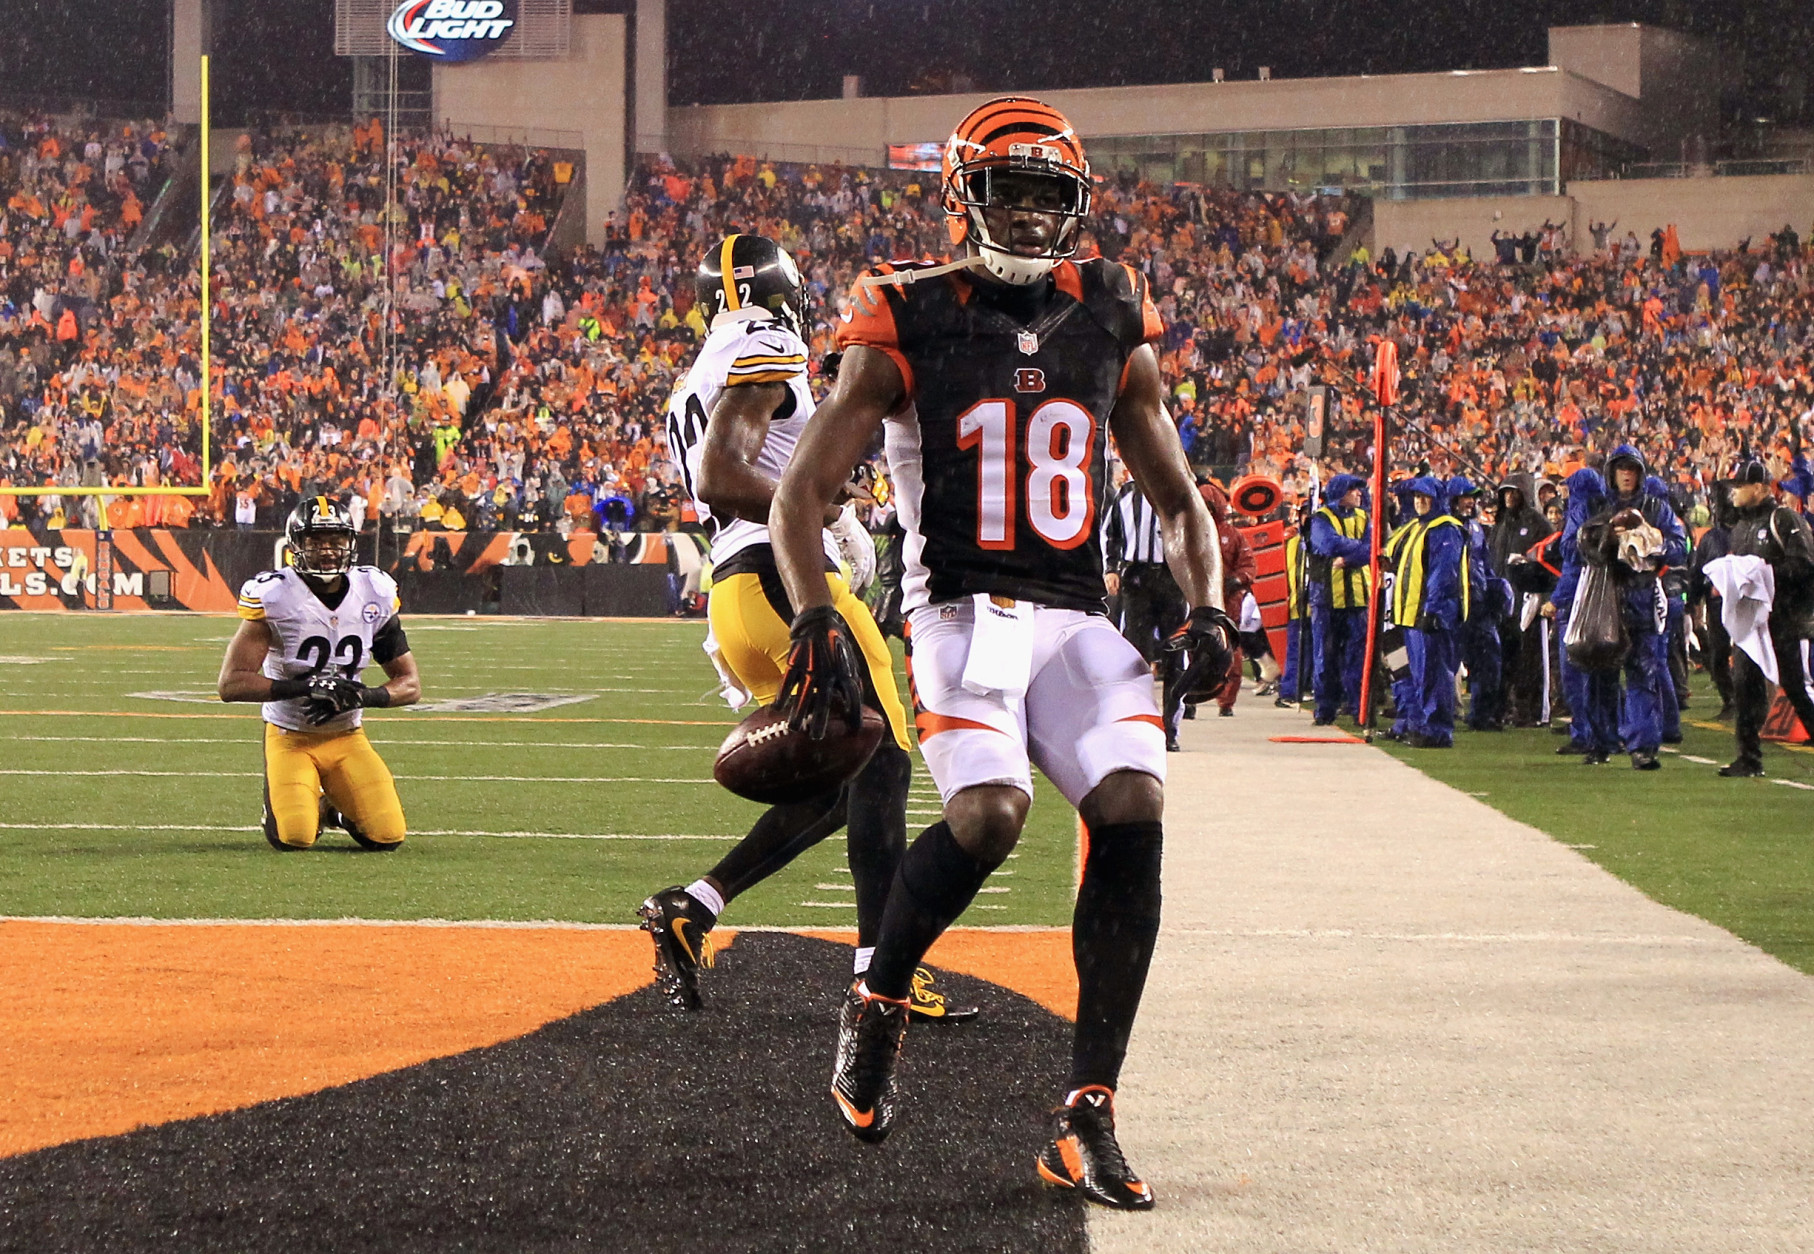 CINCINNATI, OH - JANUARY 09:  A.J. Green #18 of the Cincinnati Bengals scores a touchdown in the fourth quarter against the Pittsburgh Steelers during the AFC Wild Card Playoff game at Paul Brown Stadium on January 9, 2016 in Cincinnati, Ohio.  (Photo by Dylan Buell/Getty Images)